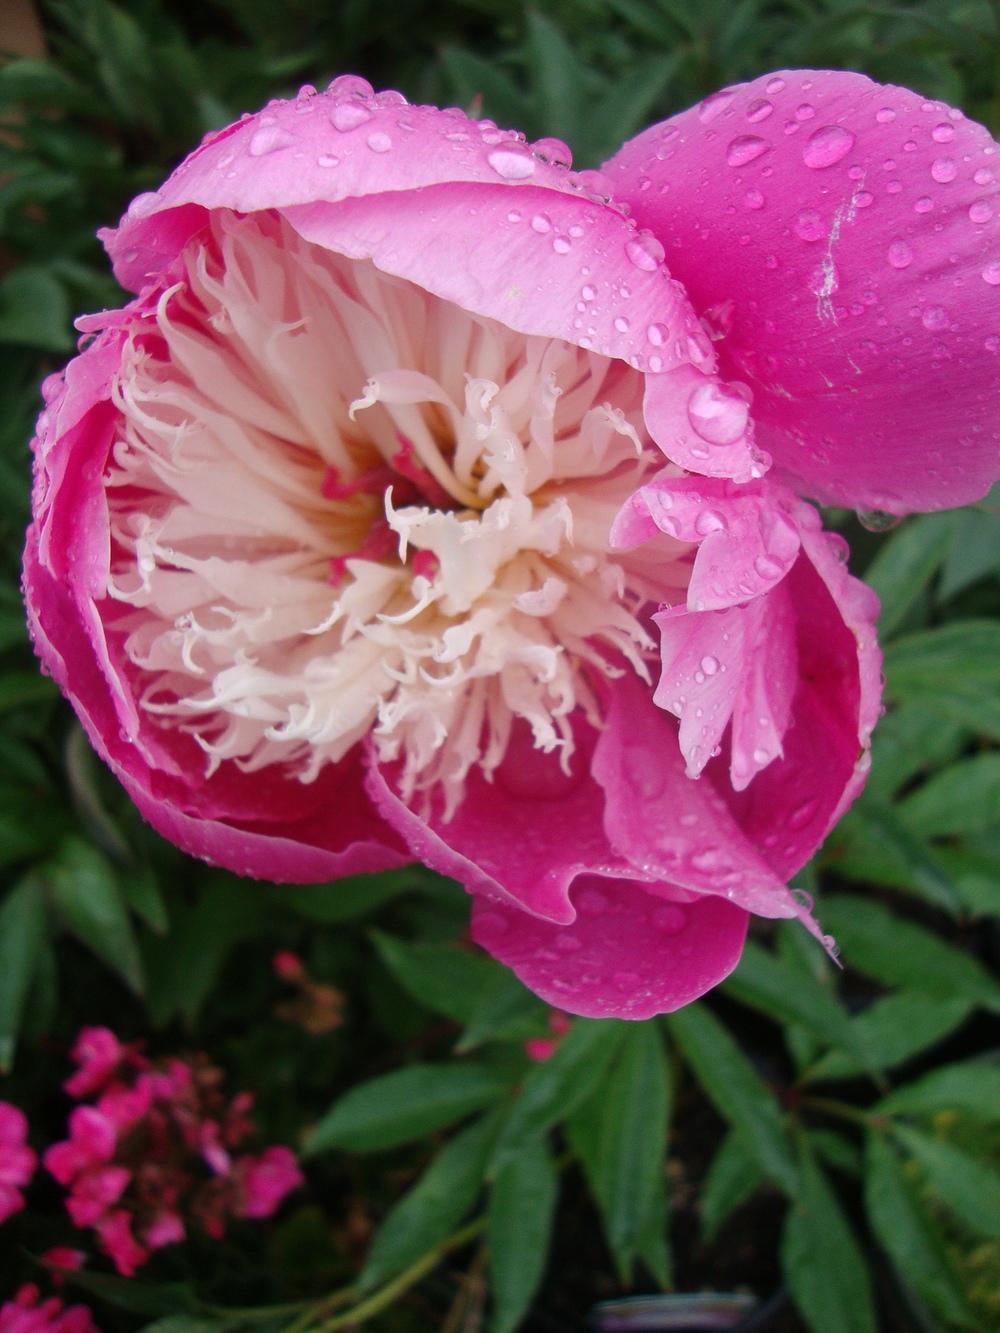 Photo of Peony (Paeonia lactiflora 'Bowl of Beauty') uploaded by Paul2032